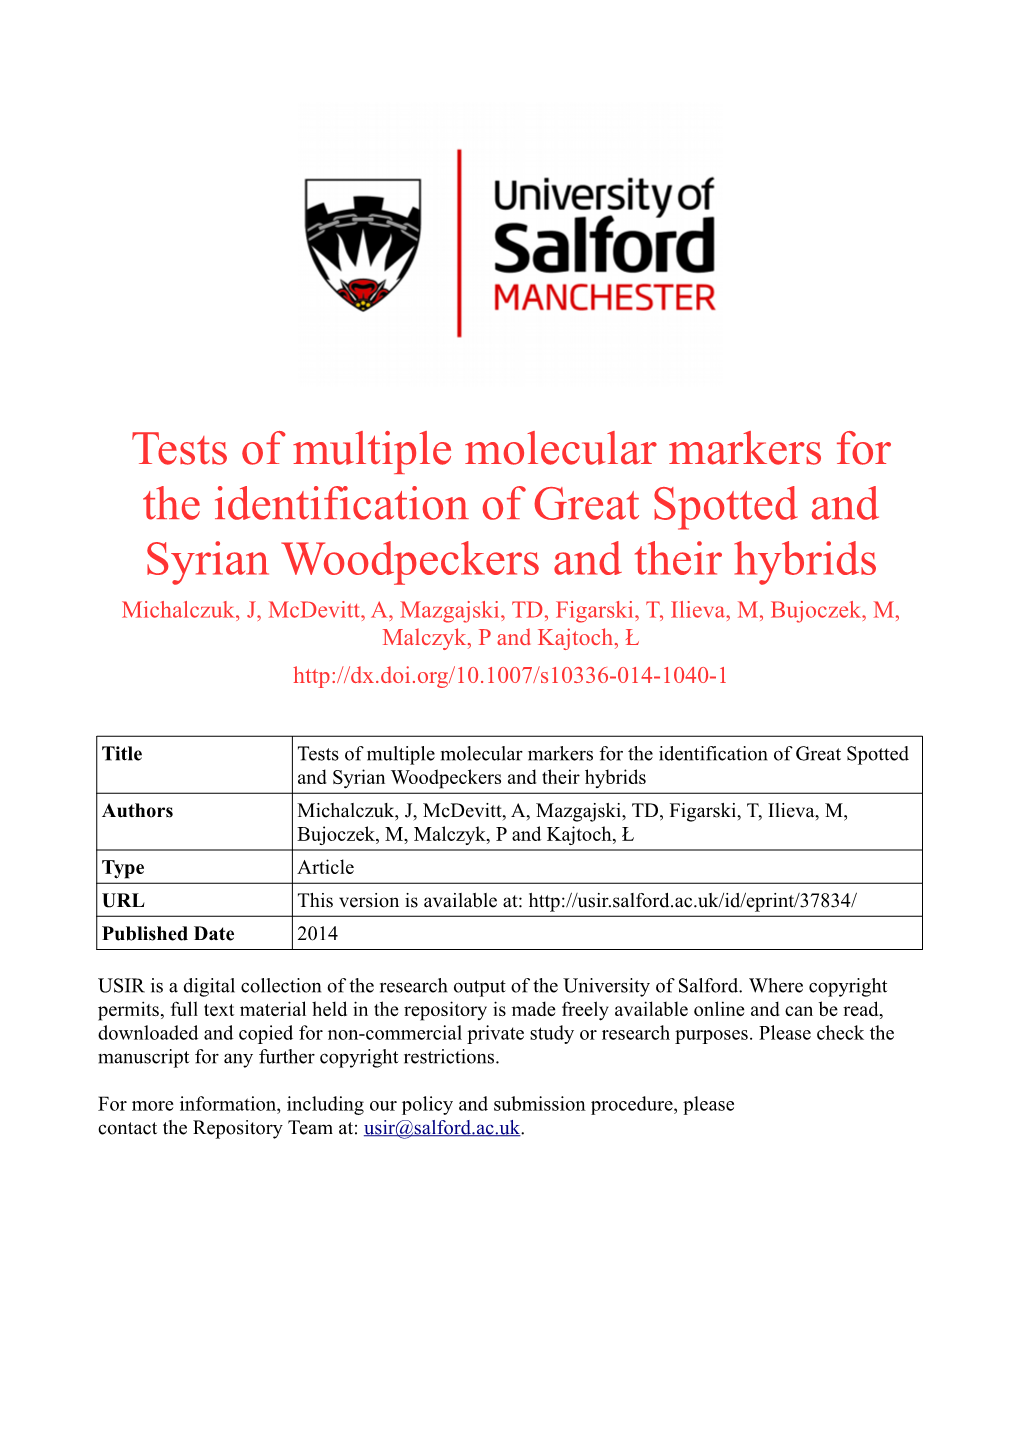 Tests of Multiple Molecular Markers for the Identification of Great Spotted